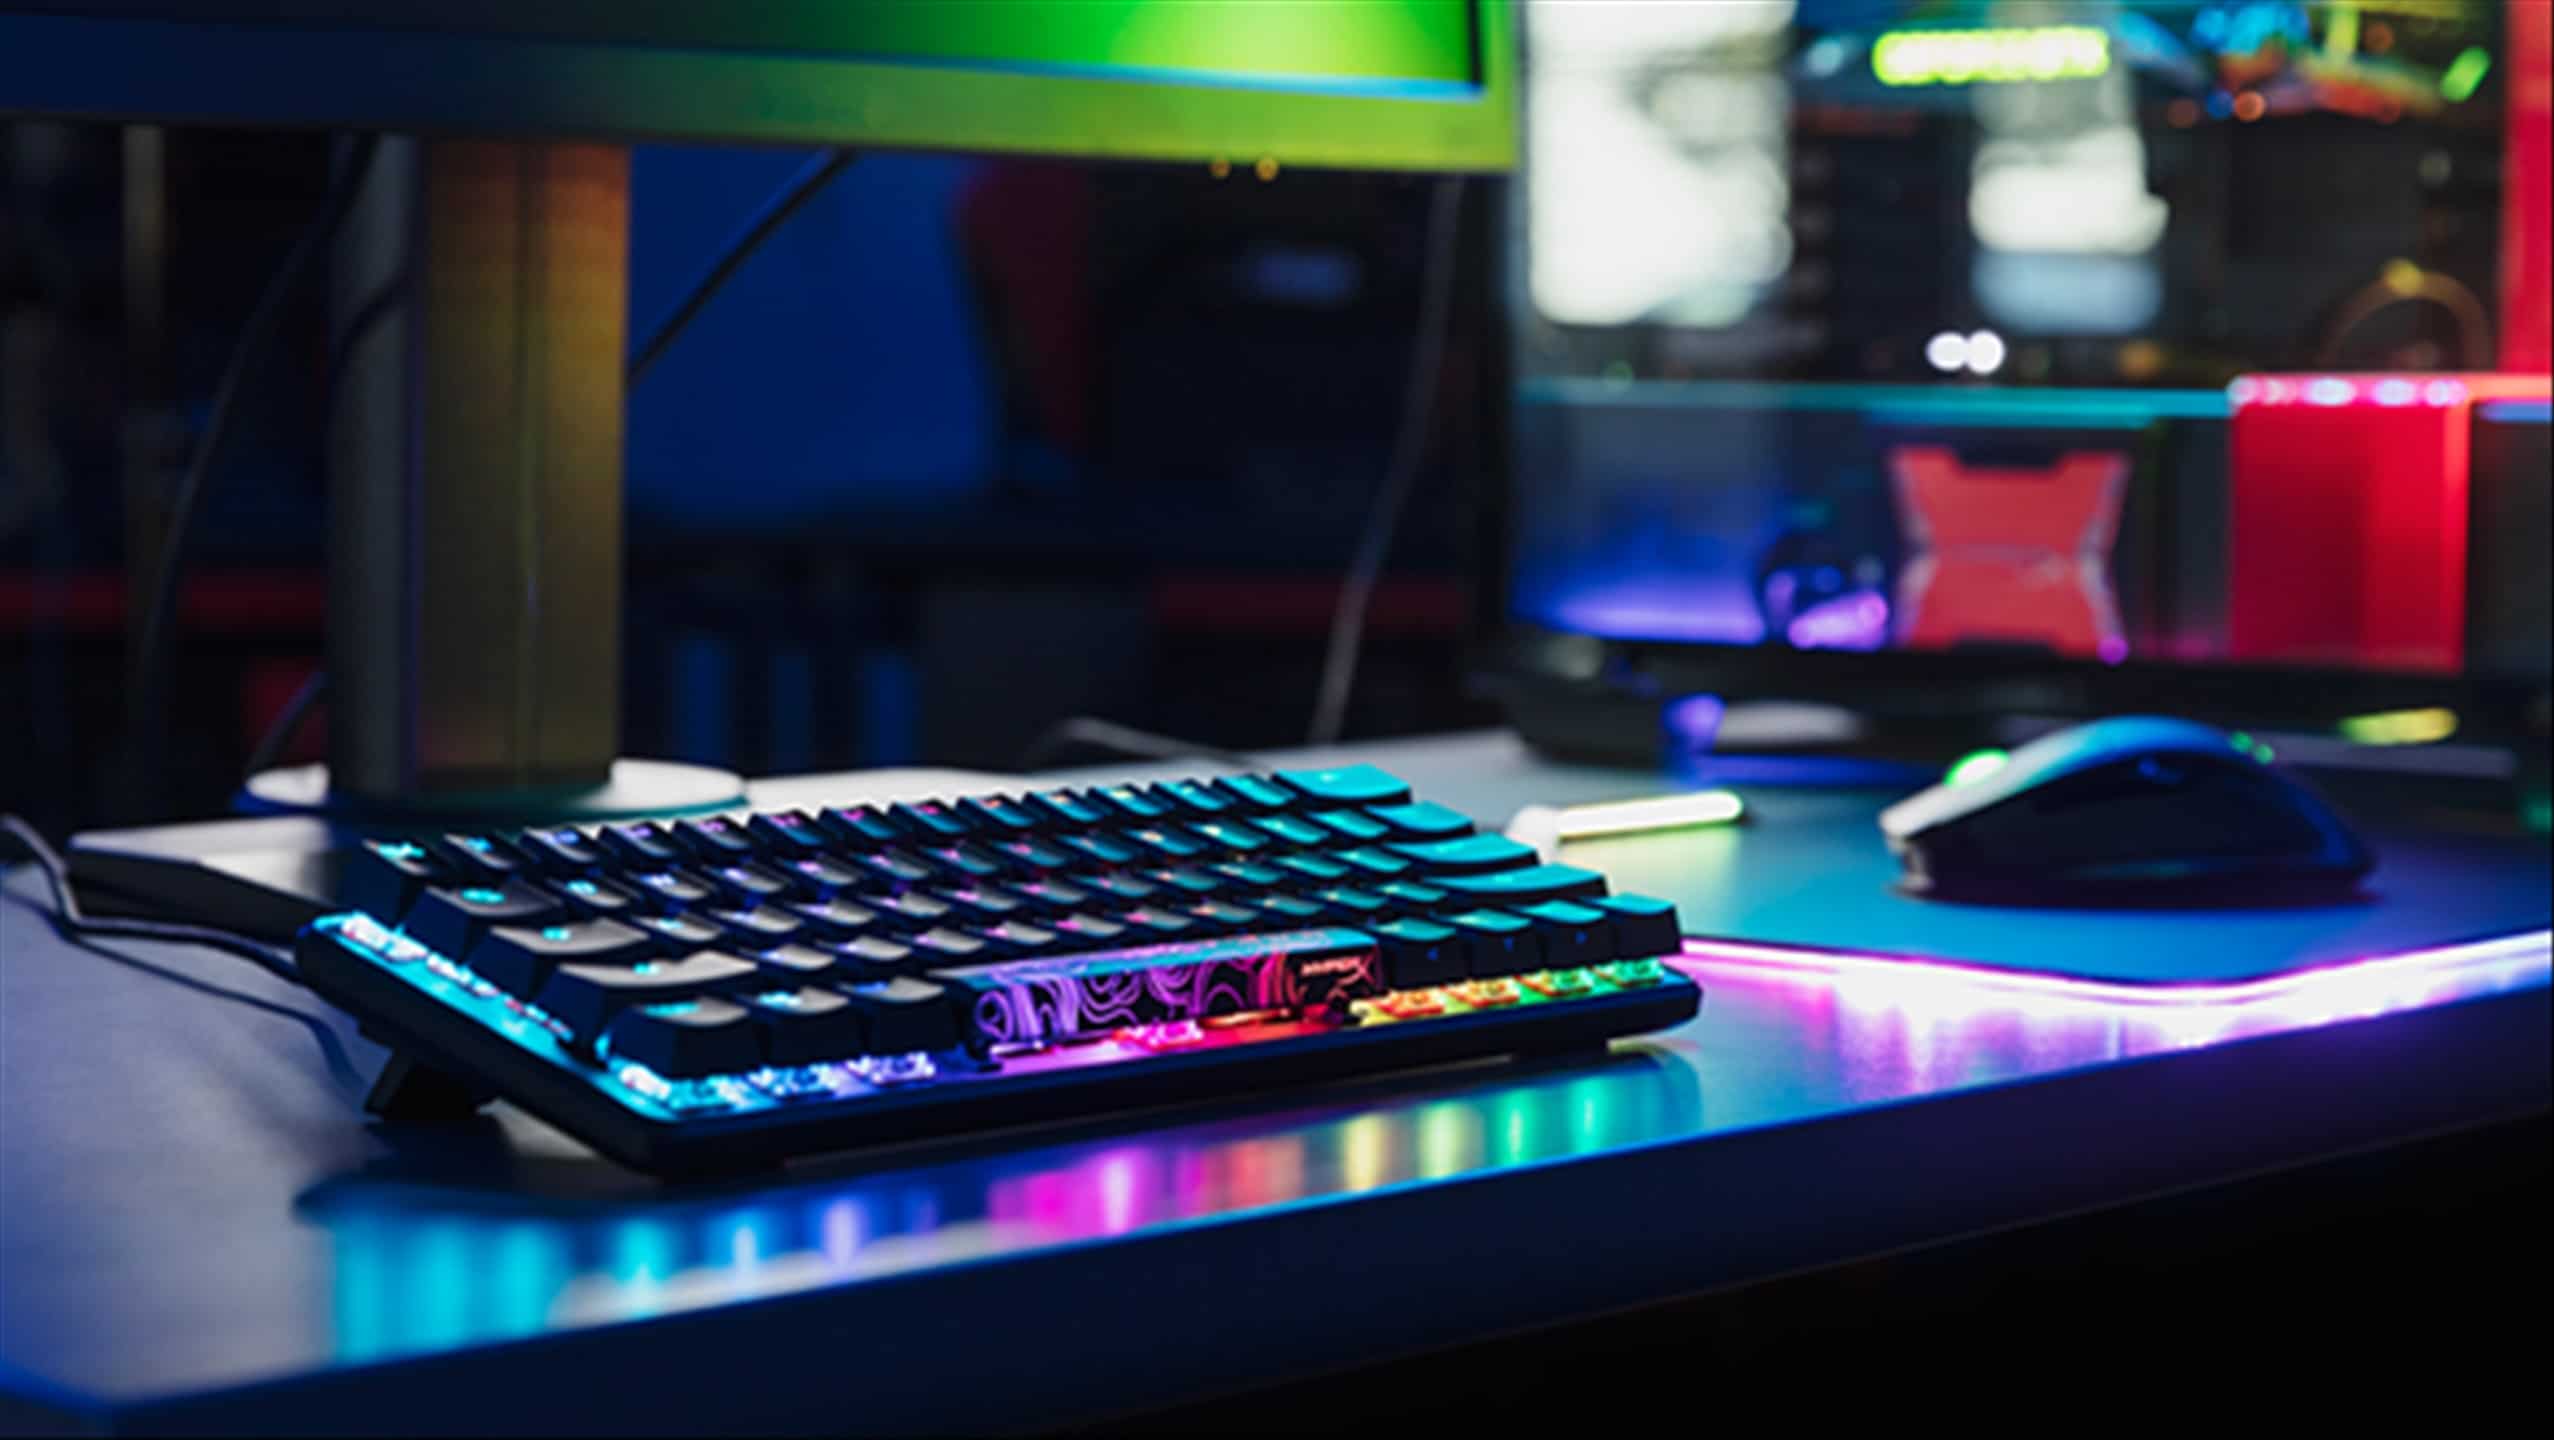 Purchasing a new keyboard? Ask yourself these three questions